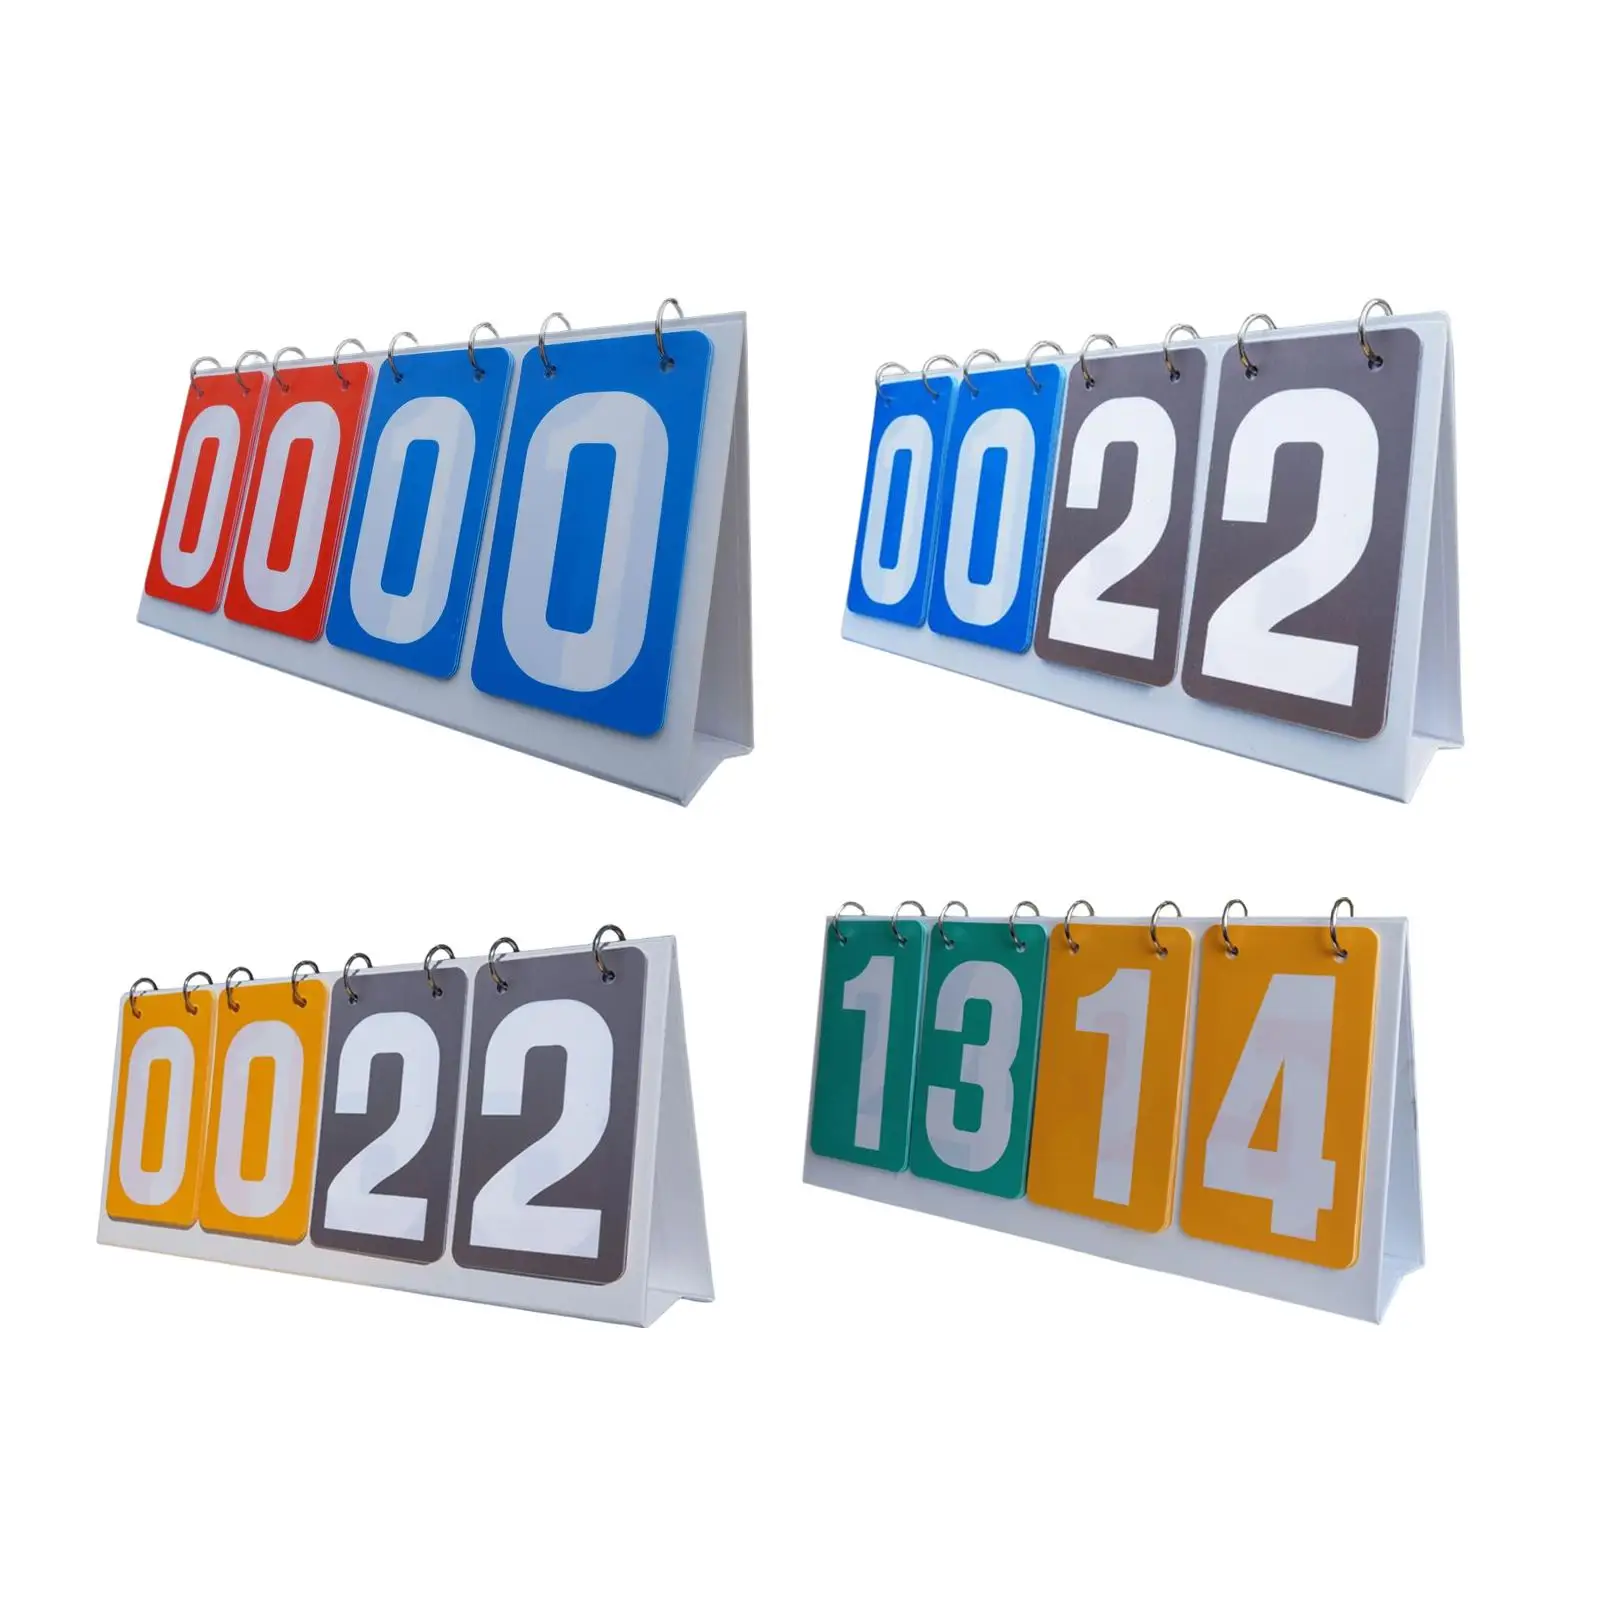 4 Digit  Score Board Game Large Competition Tabletop Scoreboard for